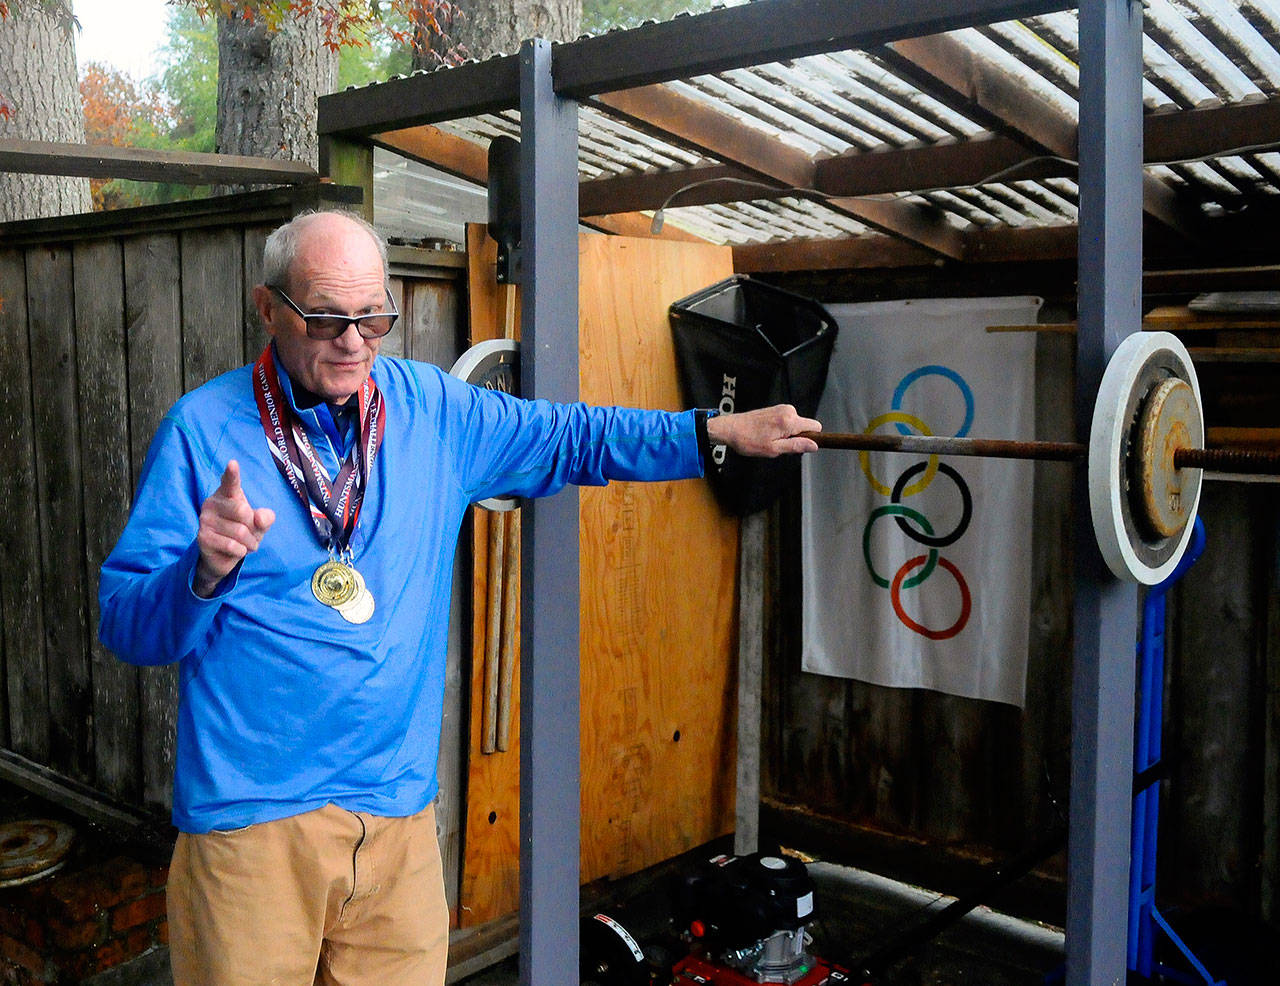 Paul Roberts stands next to his homemade squat rack in his backyard while wearing the medals he earned at the World Senior Games earlier this year. (Hasani Grayson | Grays Harbor News Group)